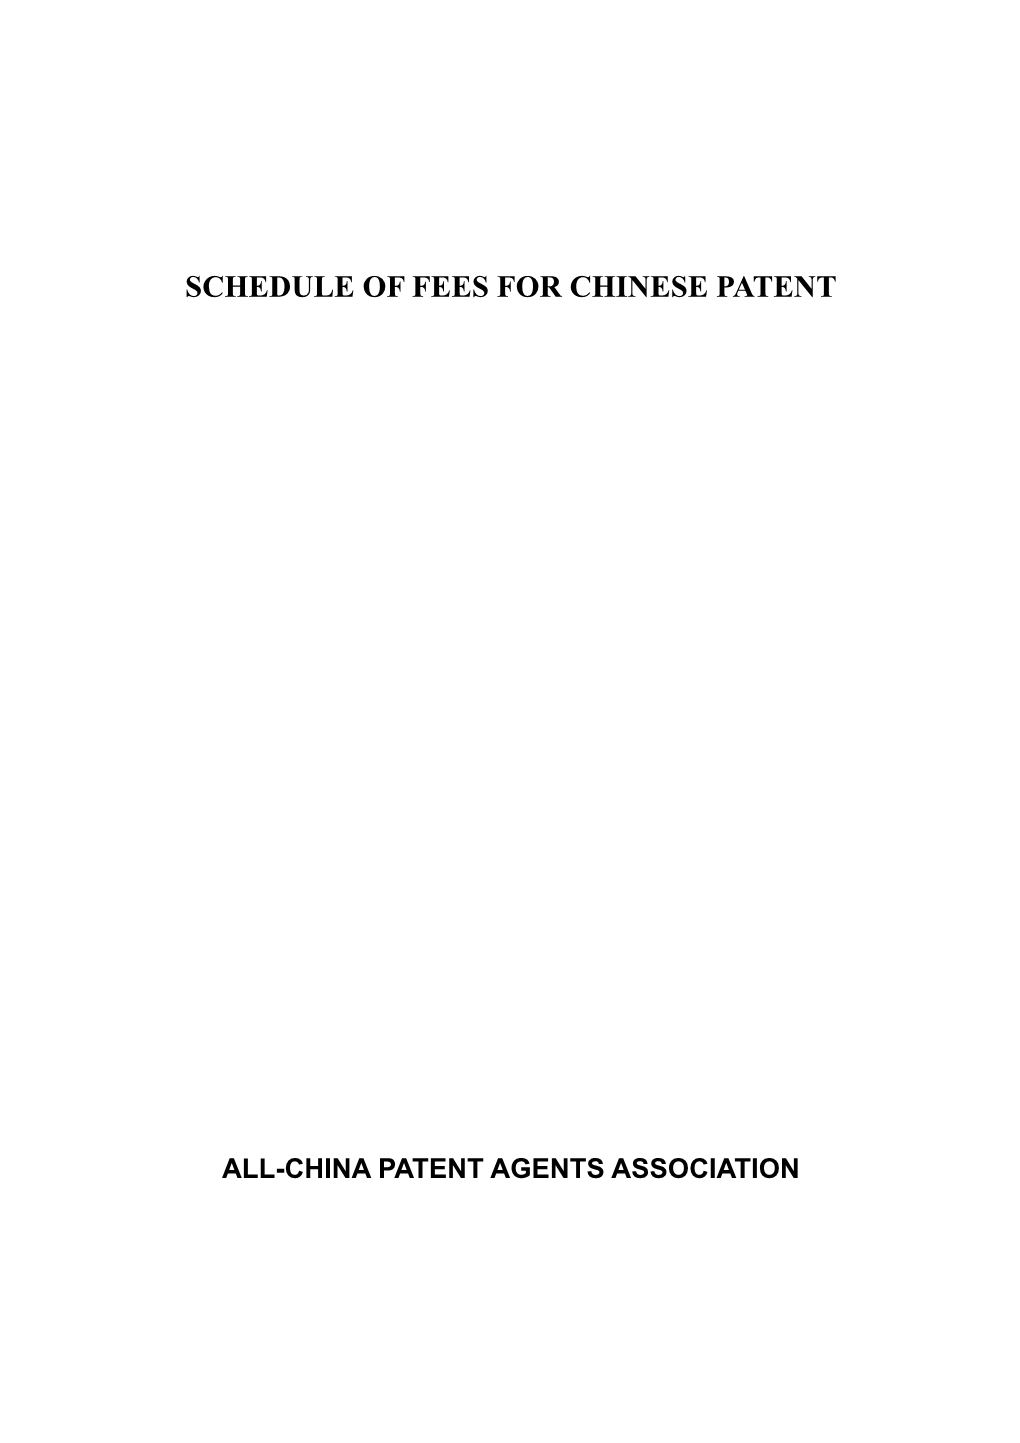 Schedule of Fees for Chinese Patent